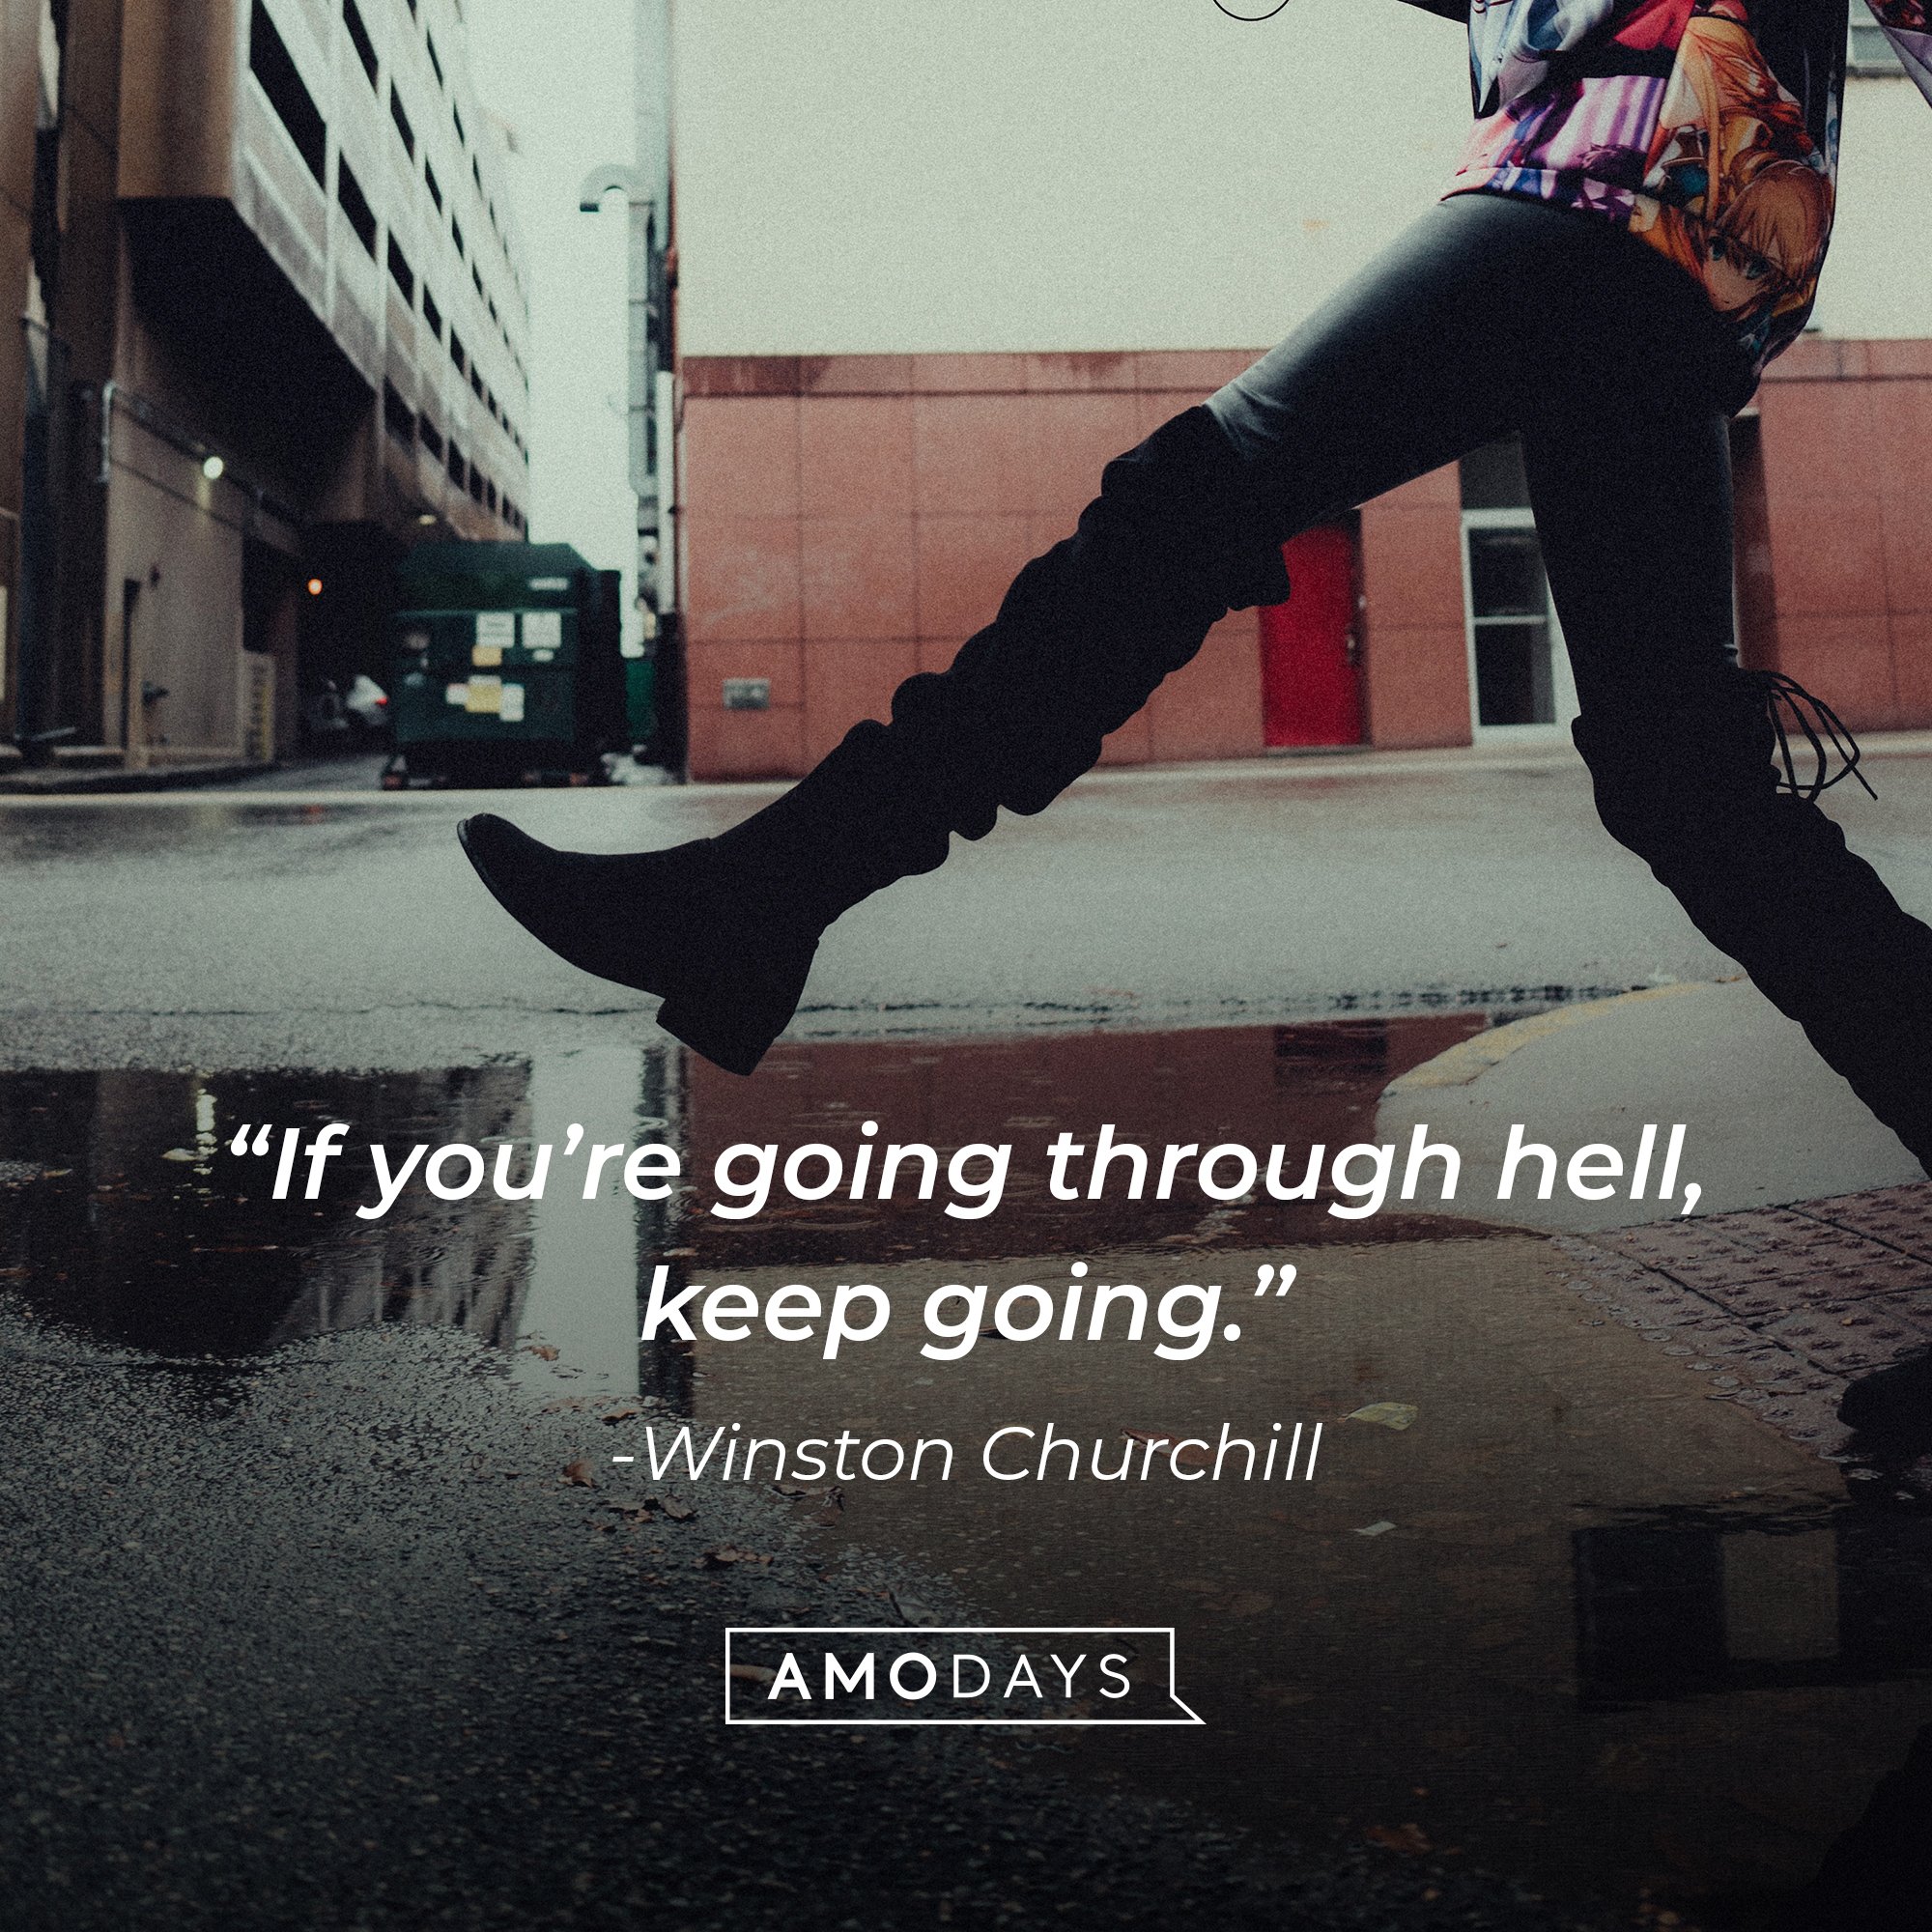 Winston Churchill's quote: “If you’re going through hell, keep going.” | Image: AmoDays